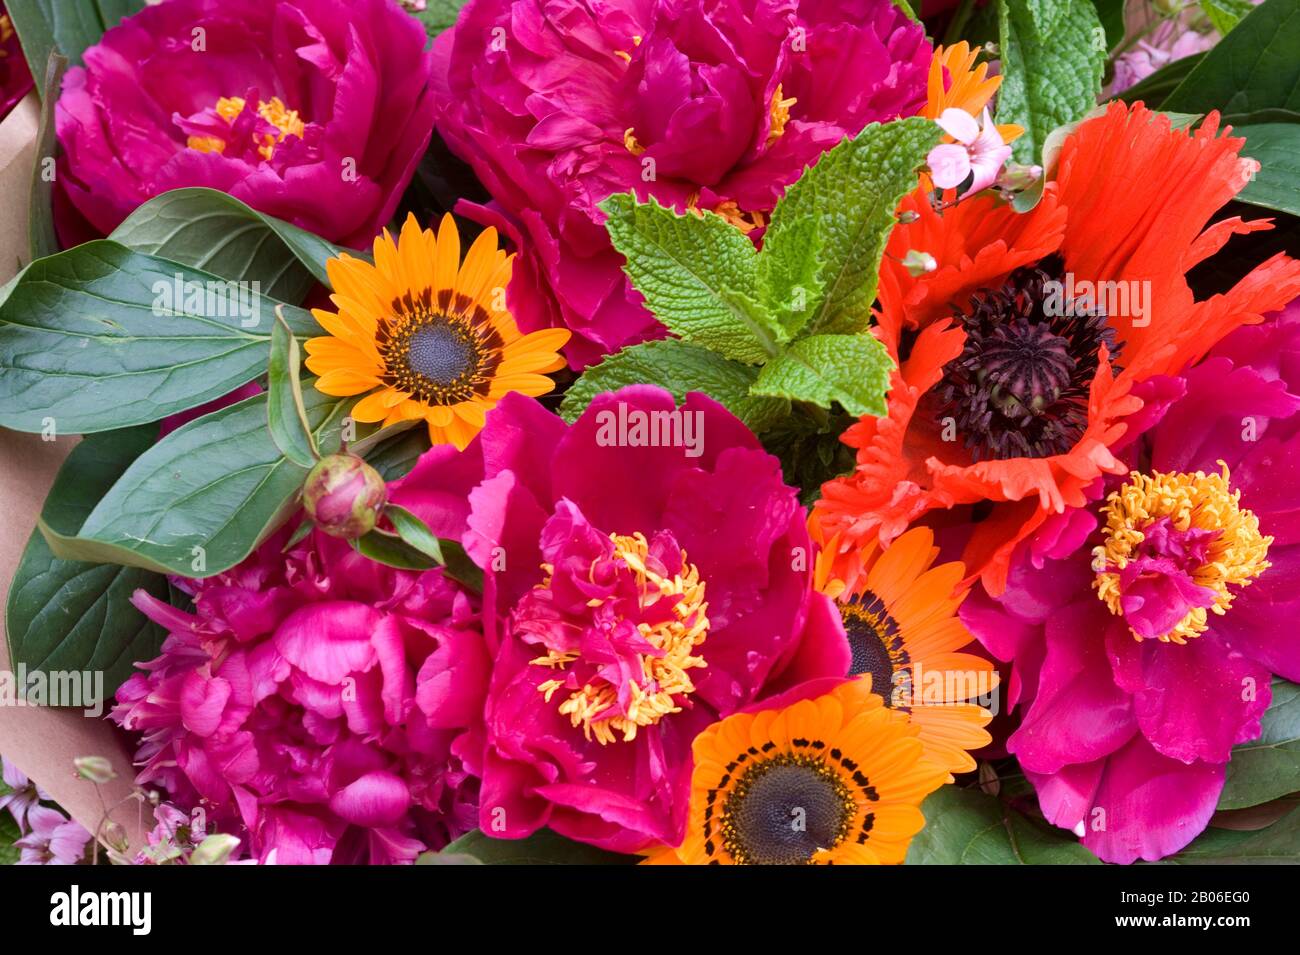 USA, WASHINGTON, SEATTLE, PIKE PLACE MARKET, FLOWER BOUQUET WITH PEONIES, SUNFLOWERS AND POPPIES Stock Photo